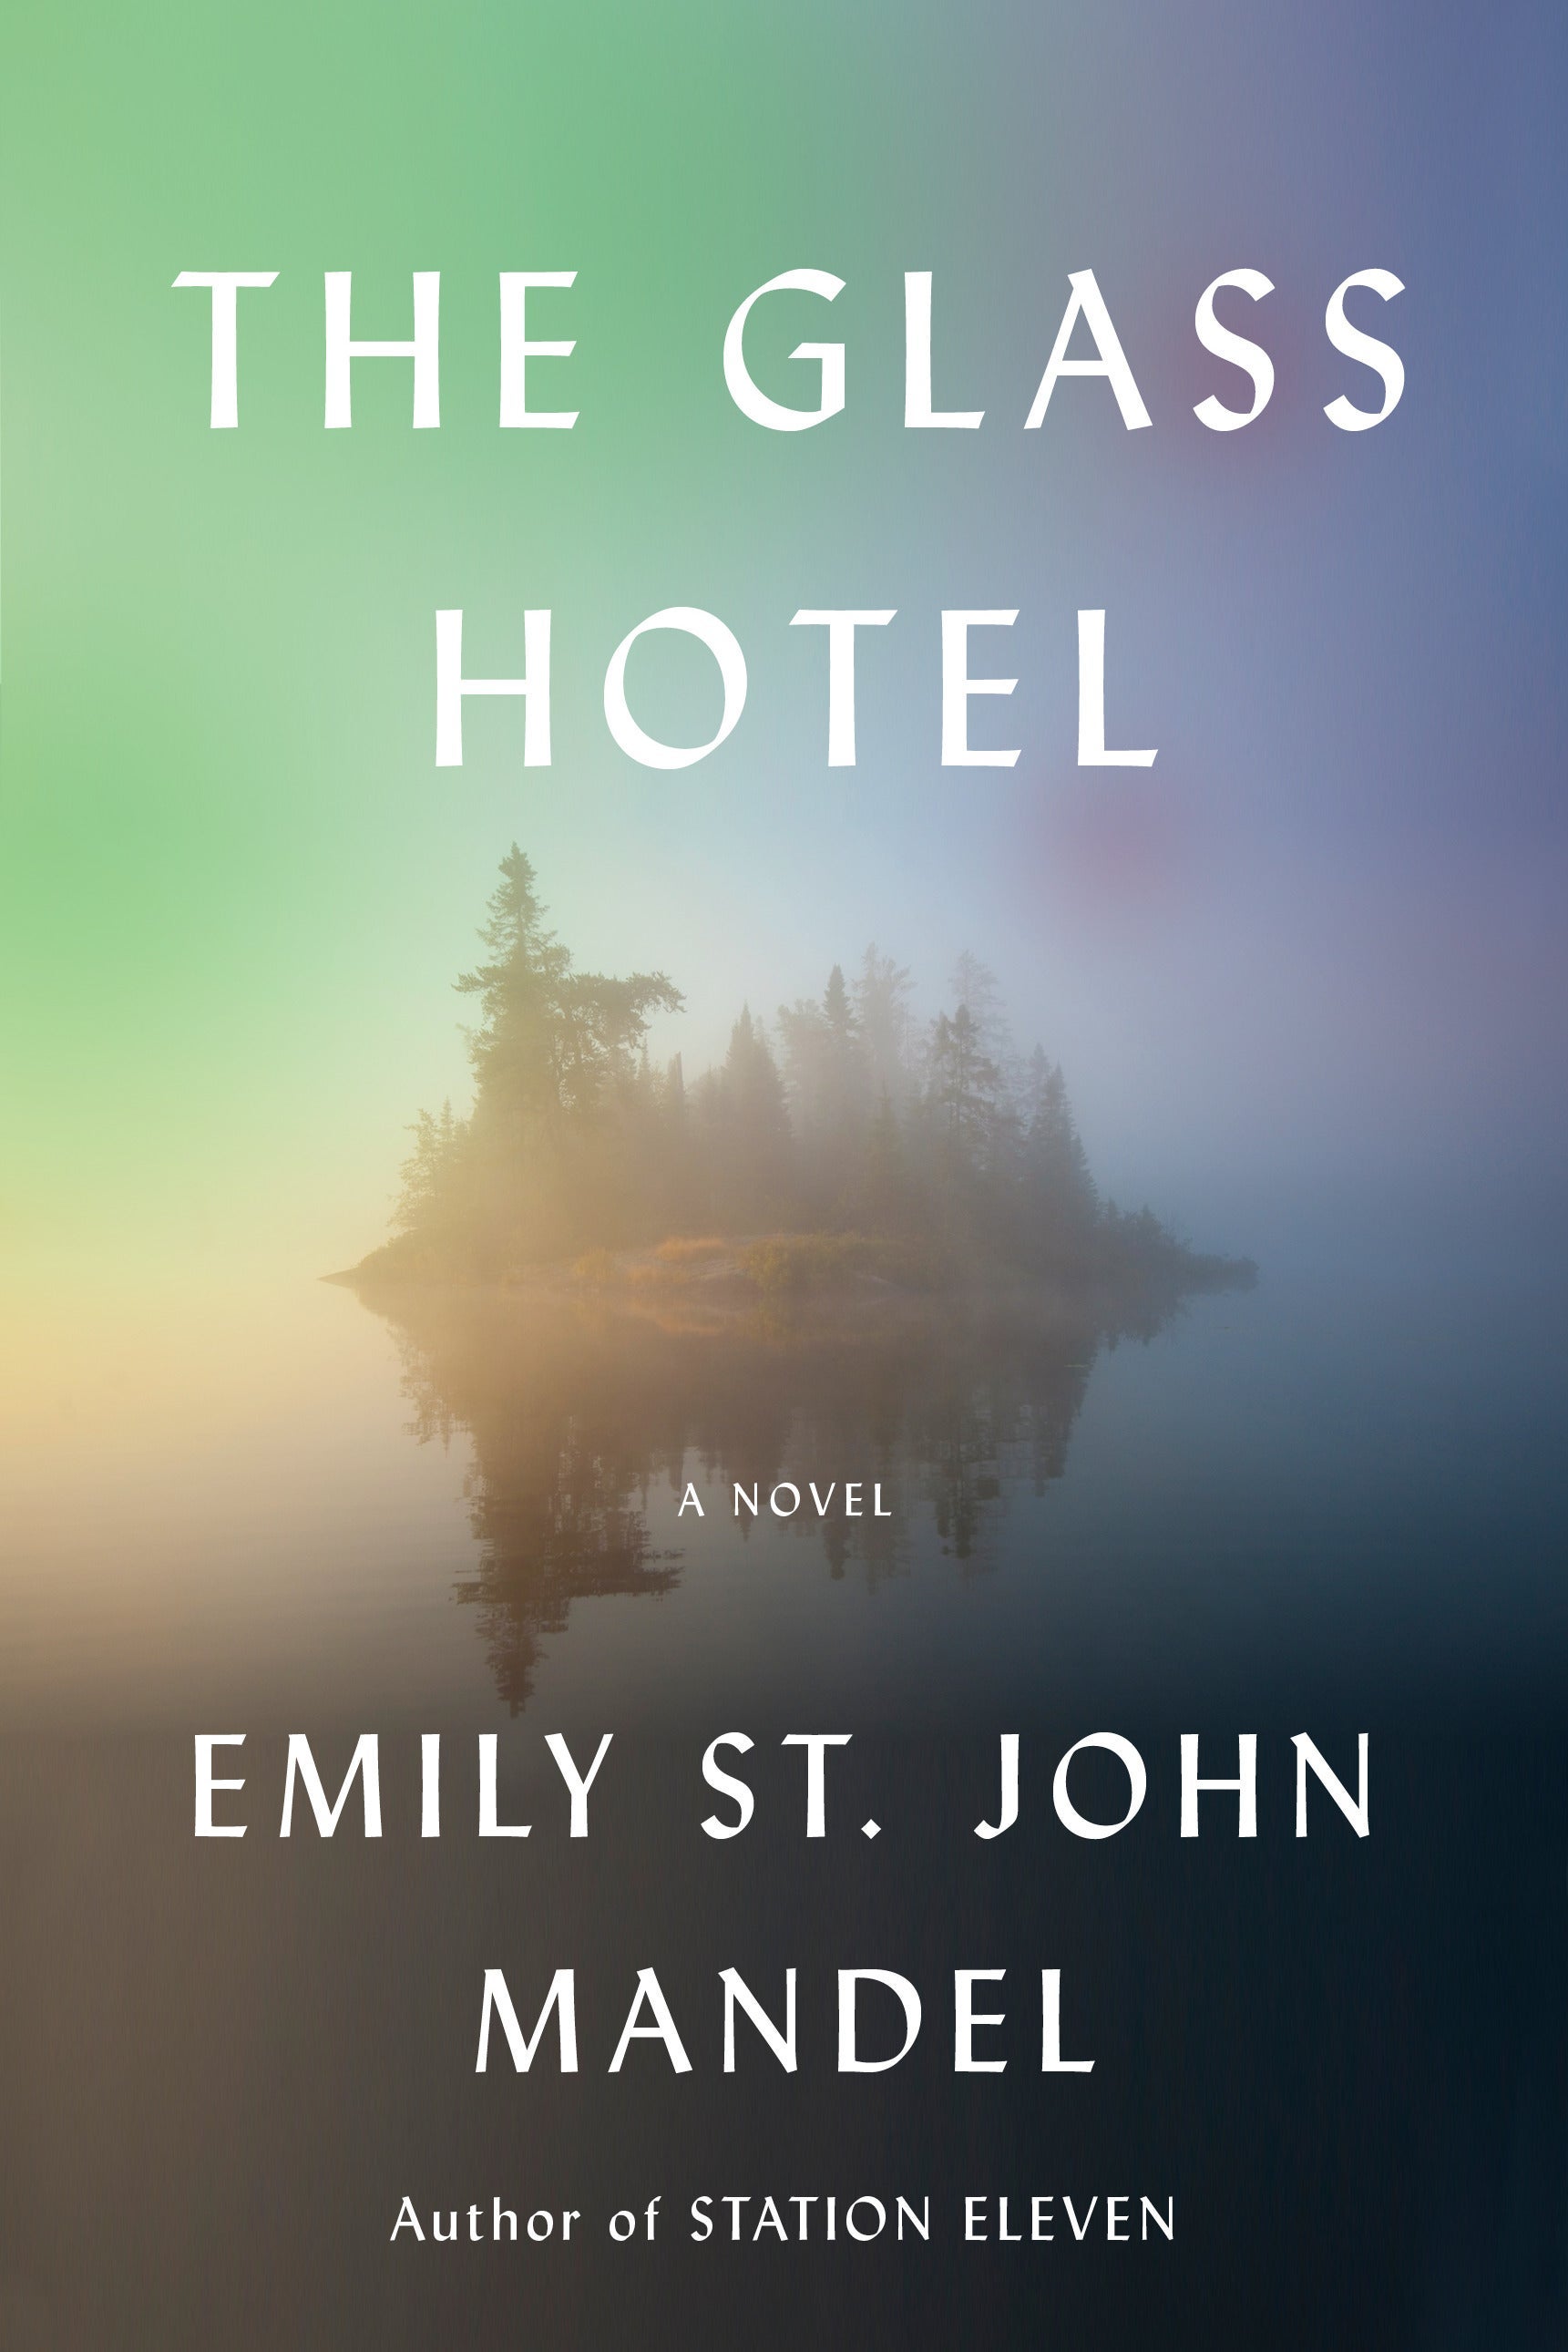 The cover of The Glass Hotel.